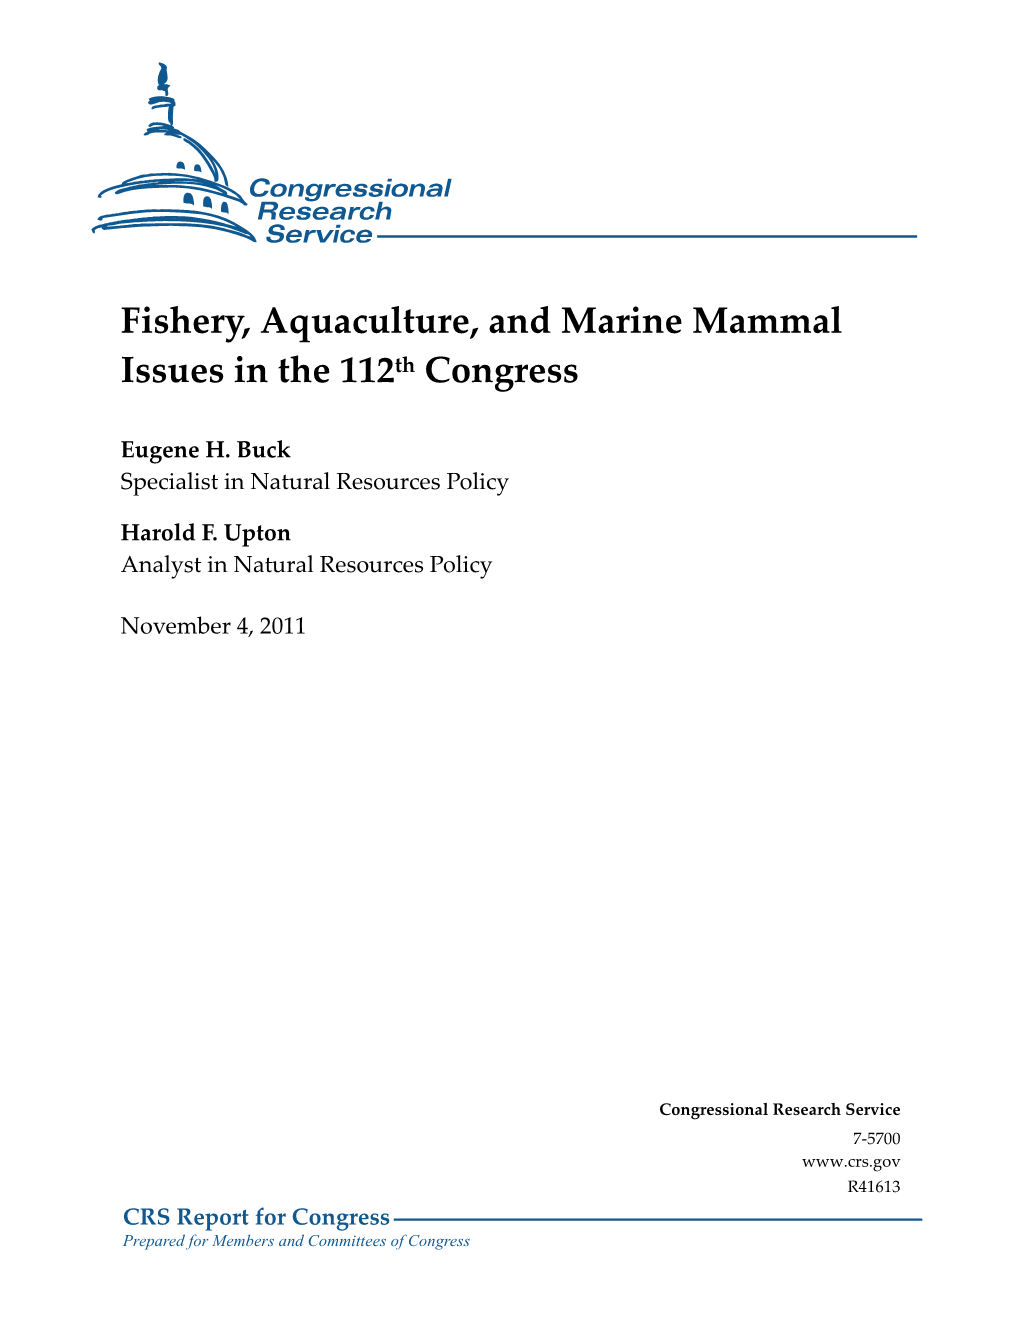 Fishery, Aquaculture, and Marine Mammal Issues in the 112Th Congress